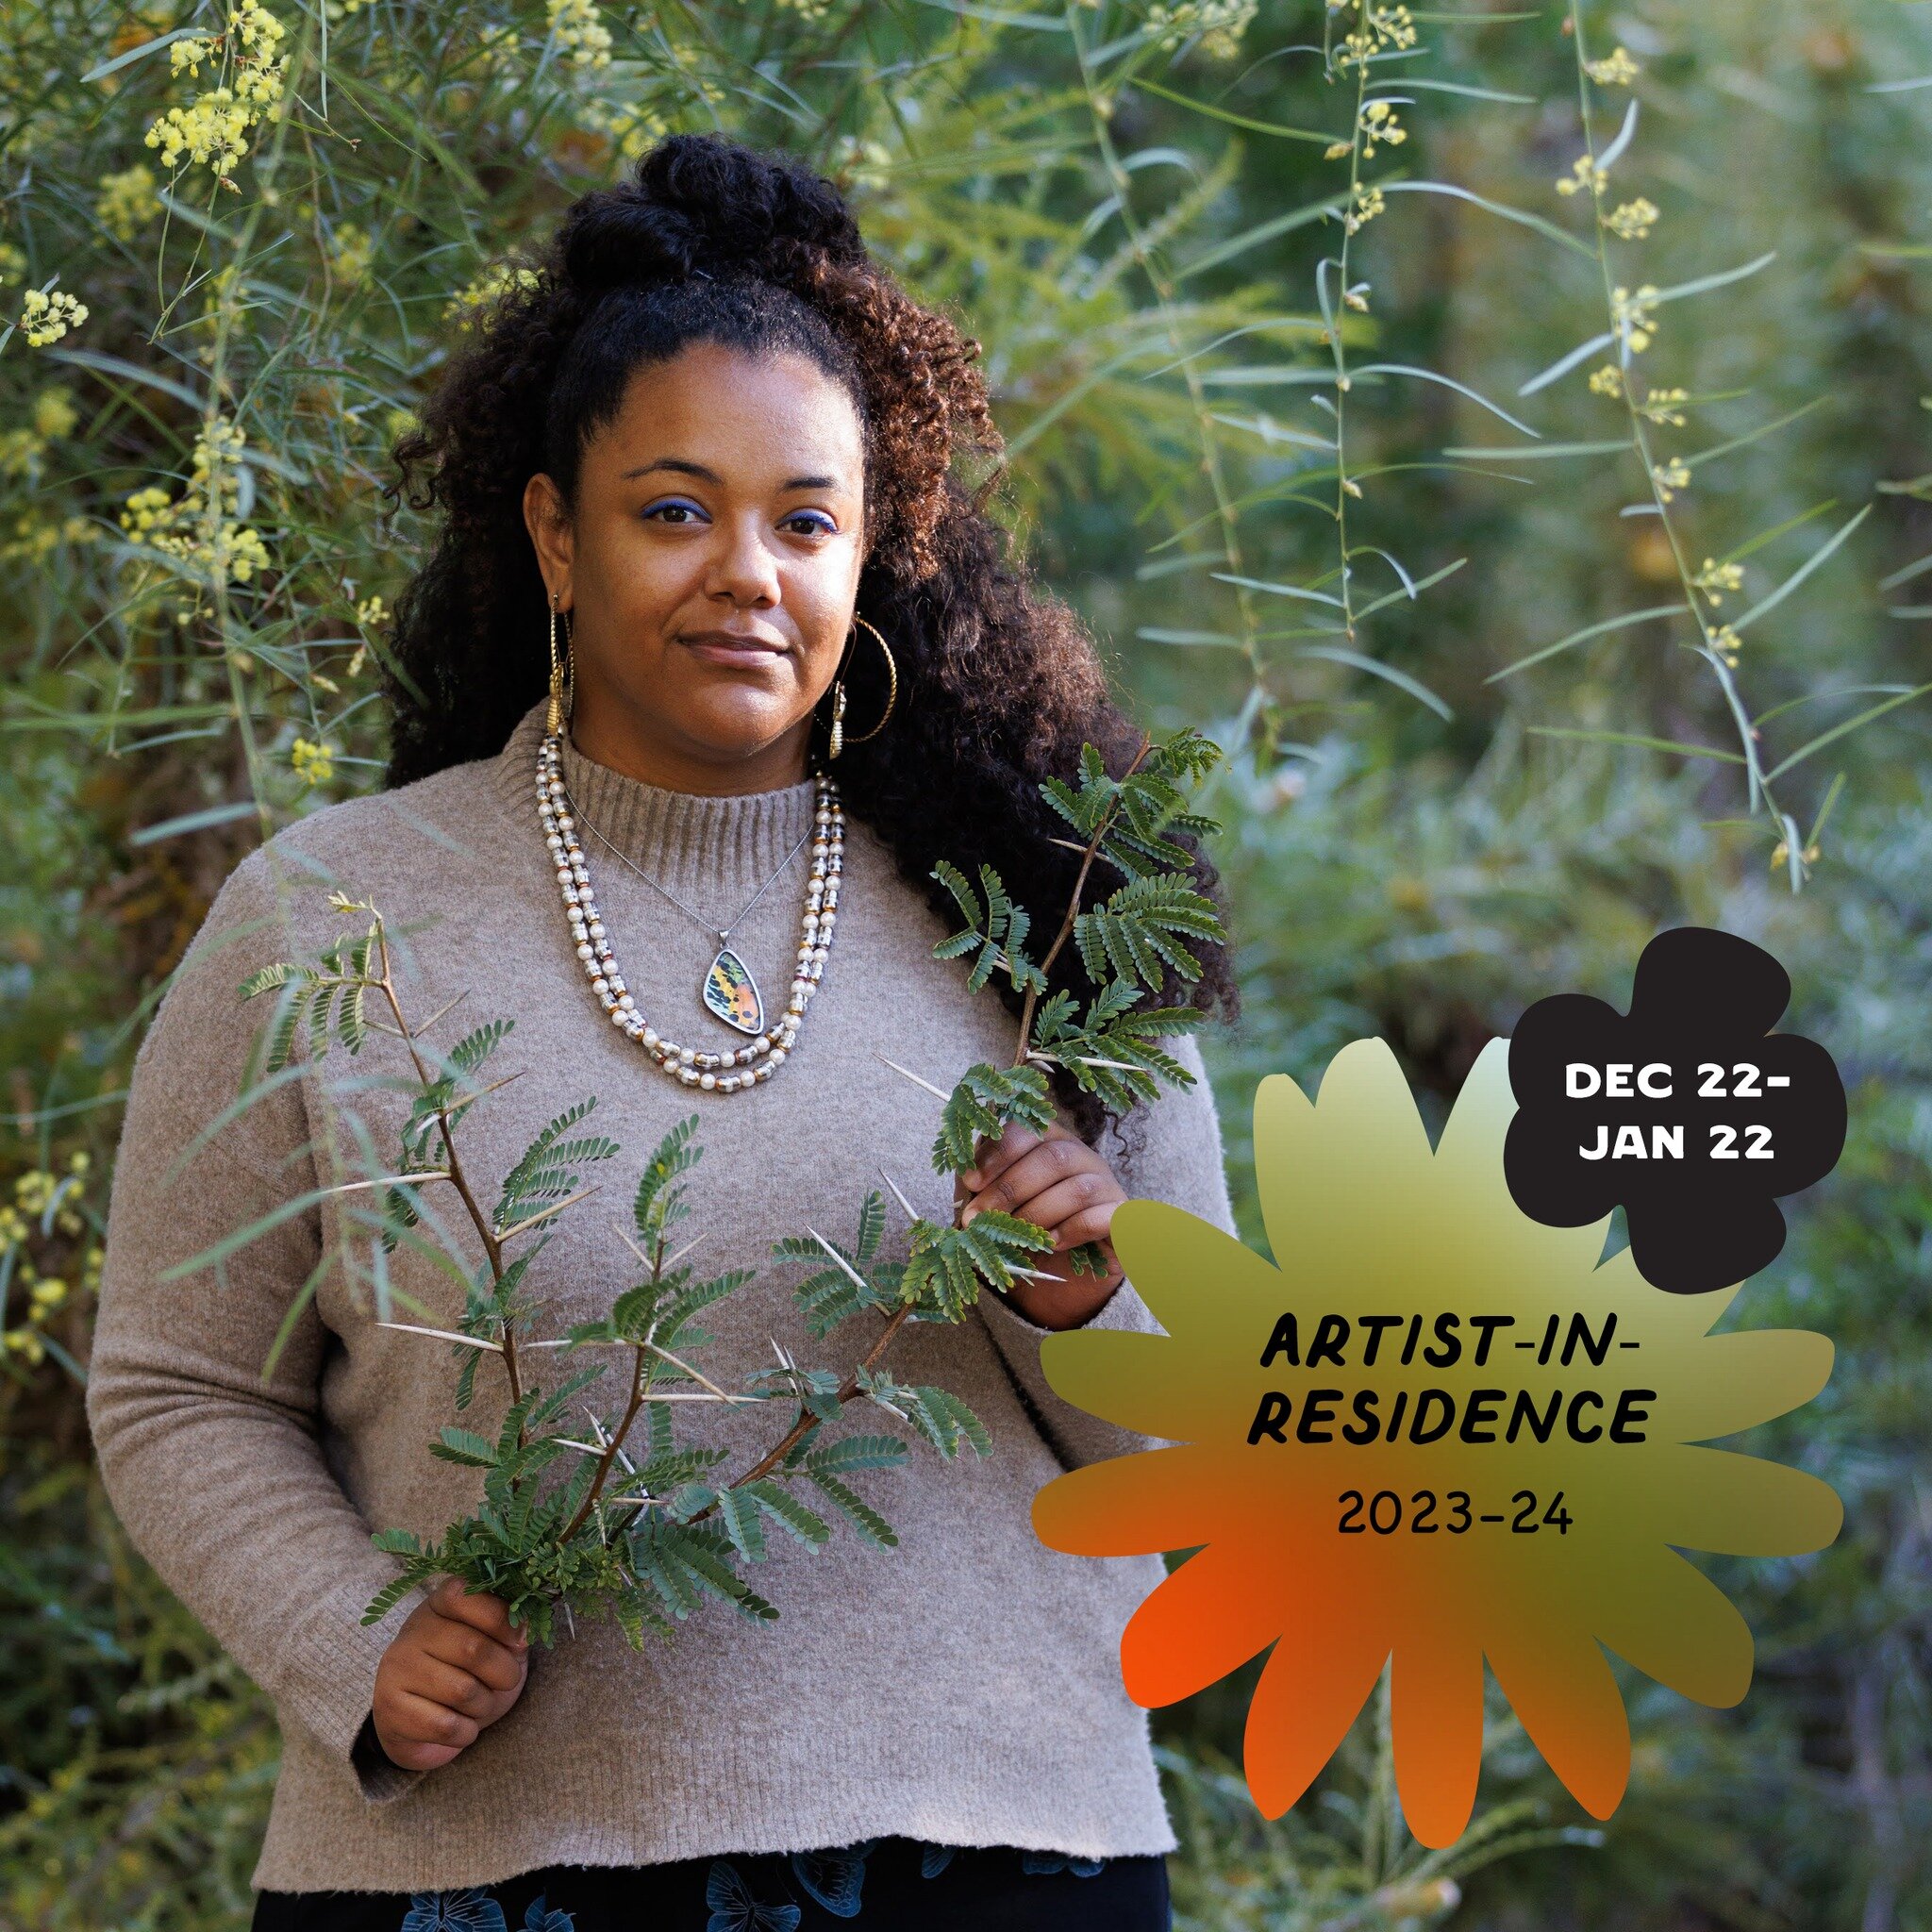 Each year, Taft Gardens chooses one Invitational Artist-in-Residence for a one-month residency. That person is either at a peak in their career or uniquely compatible with the program, and we are interested in what they might create, given special ac